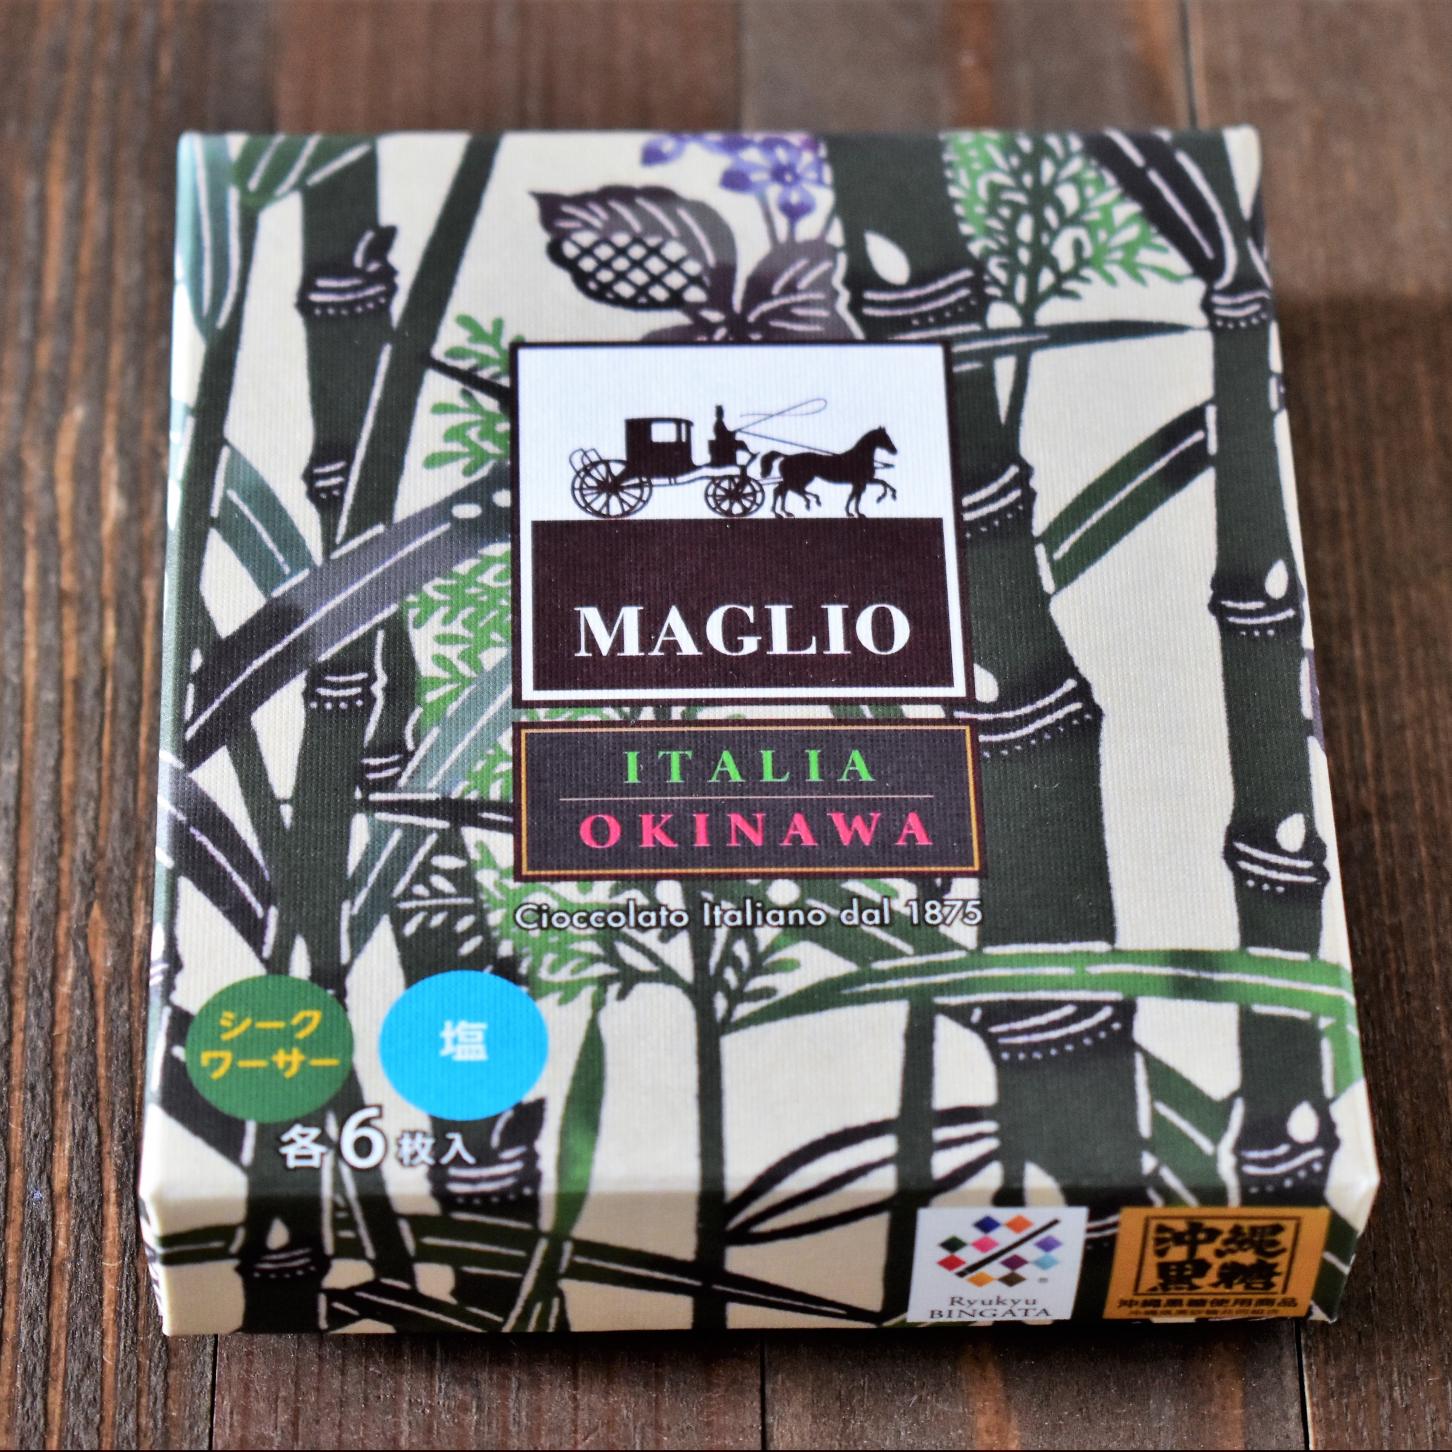 MAGLIOチョコレート(シークワーサー、塩)